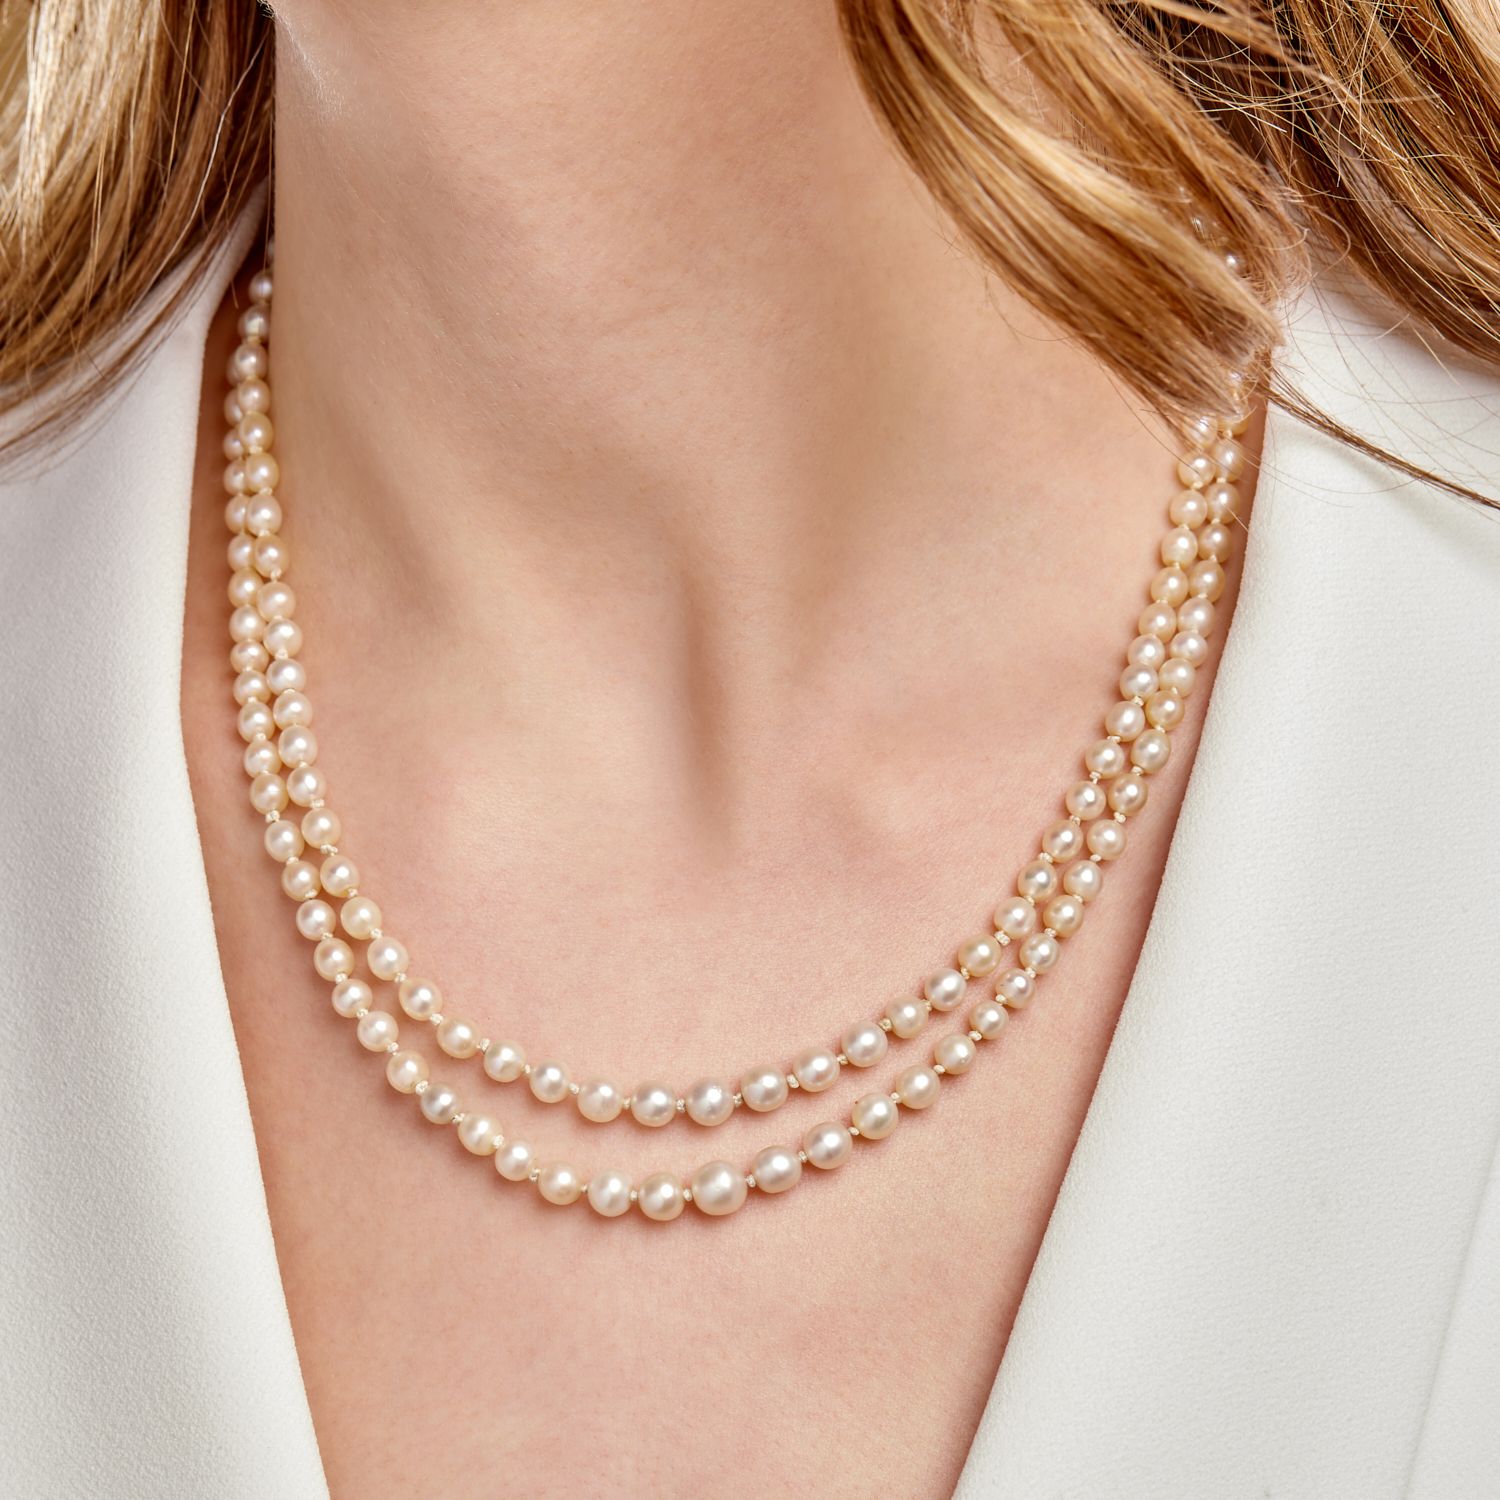 Null NECKLACE DOUBLE ROW FINE PEARLS
It consists of one hundred and fifty-six fi&hellip;